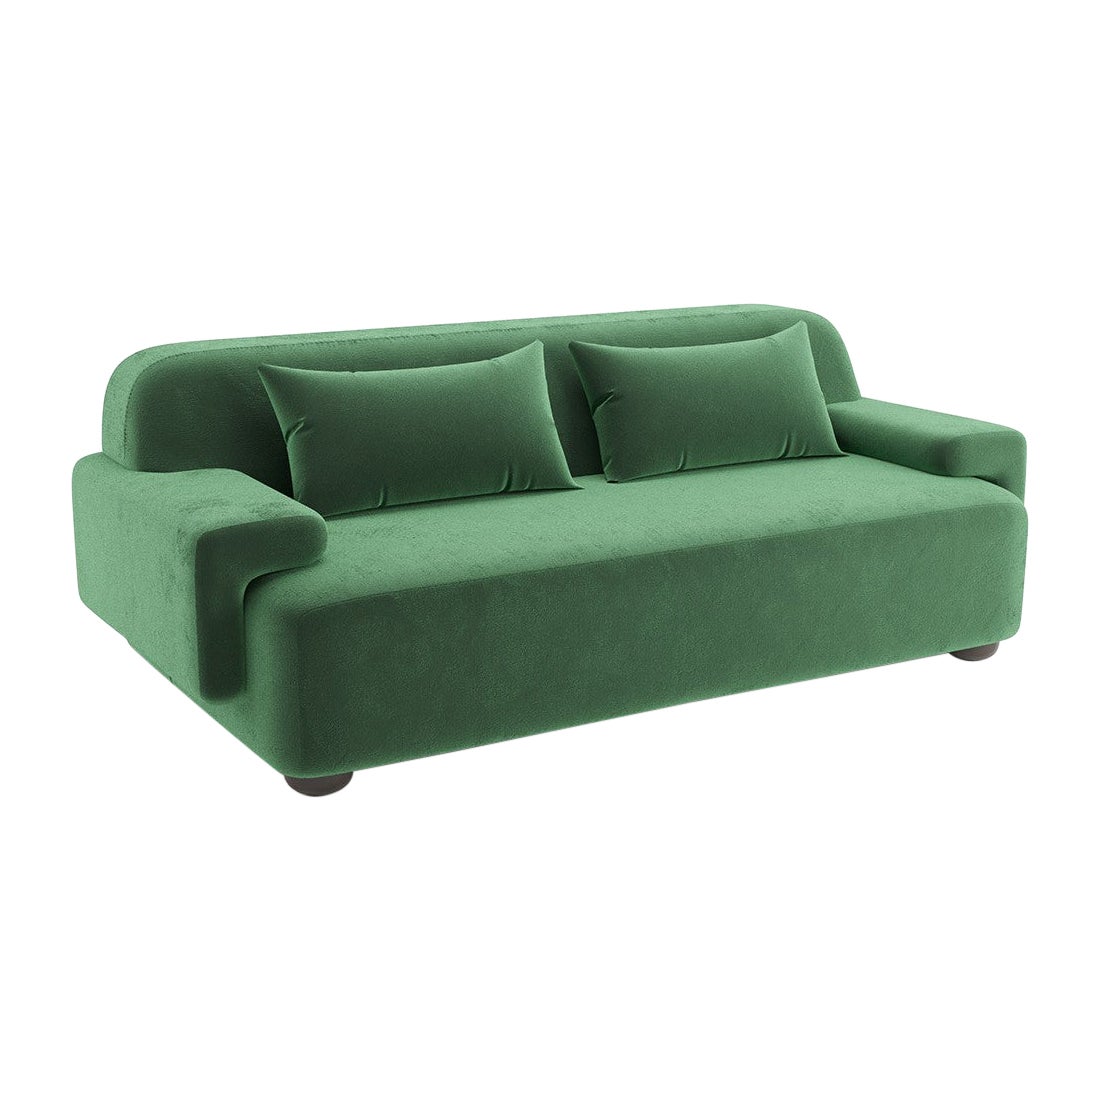 Popus Editions Lena 3 Seater Sofa in Green '771727' Como Velvet Upholstery For Sale